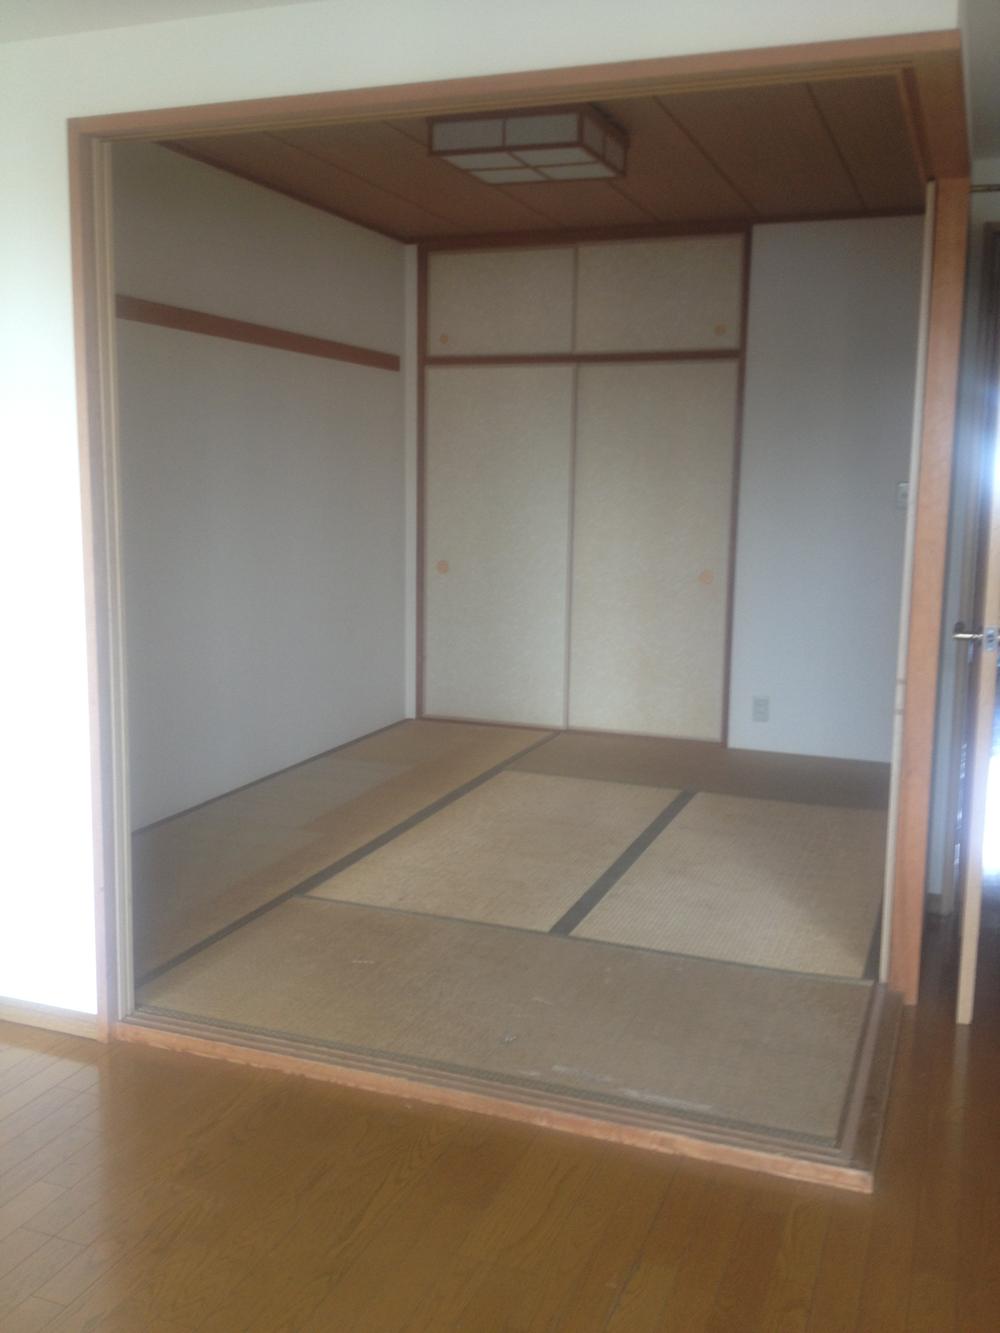 Other introspection. Also with Japanese-style room.